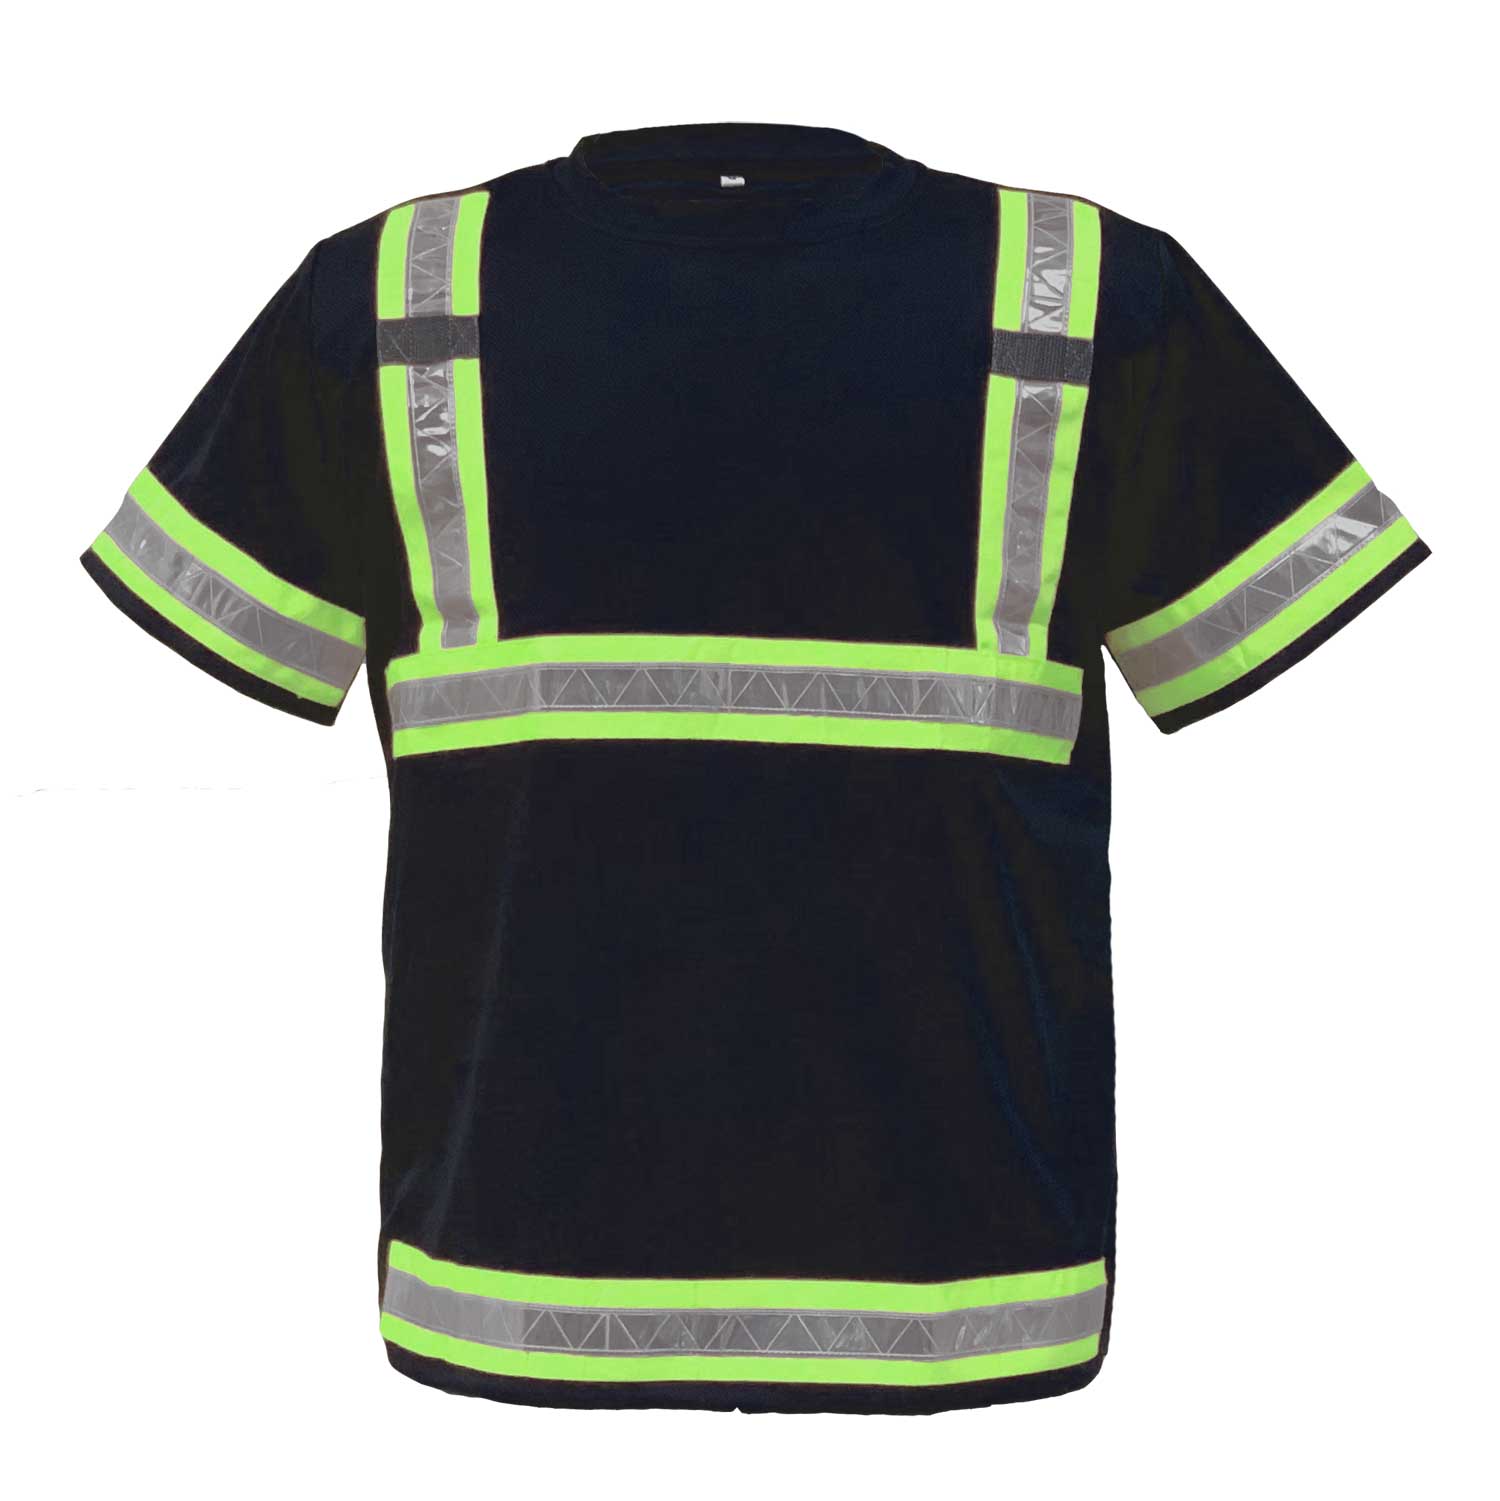 Reflective Safety Work Shirts For Men - High Visibility Short Sleeve T Shirts ANSI Class 3 Gear with Reflective Tape